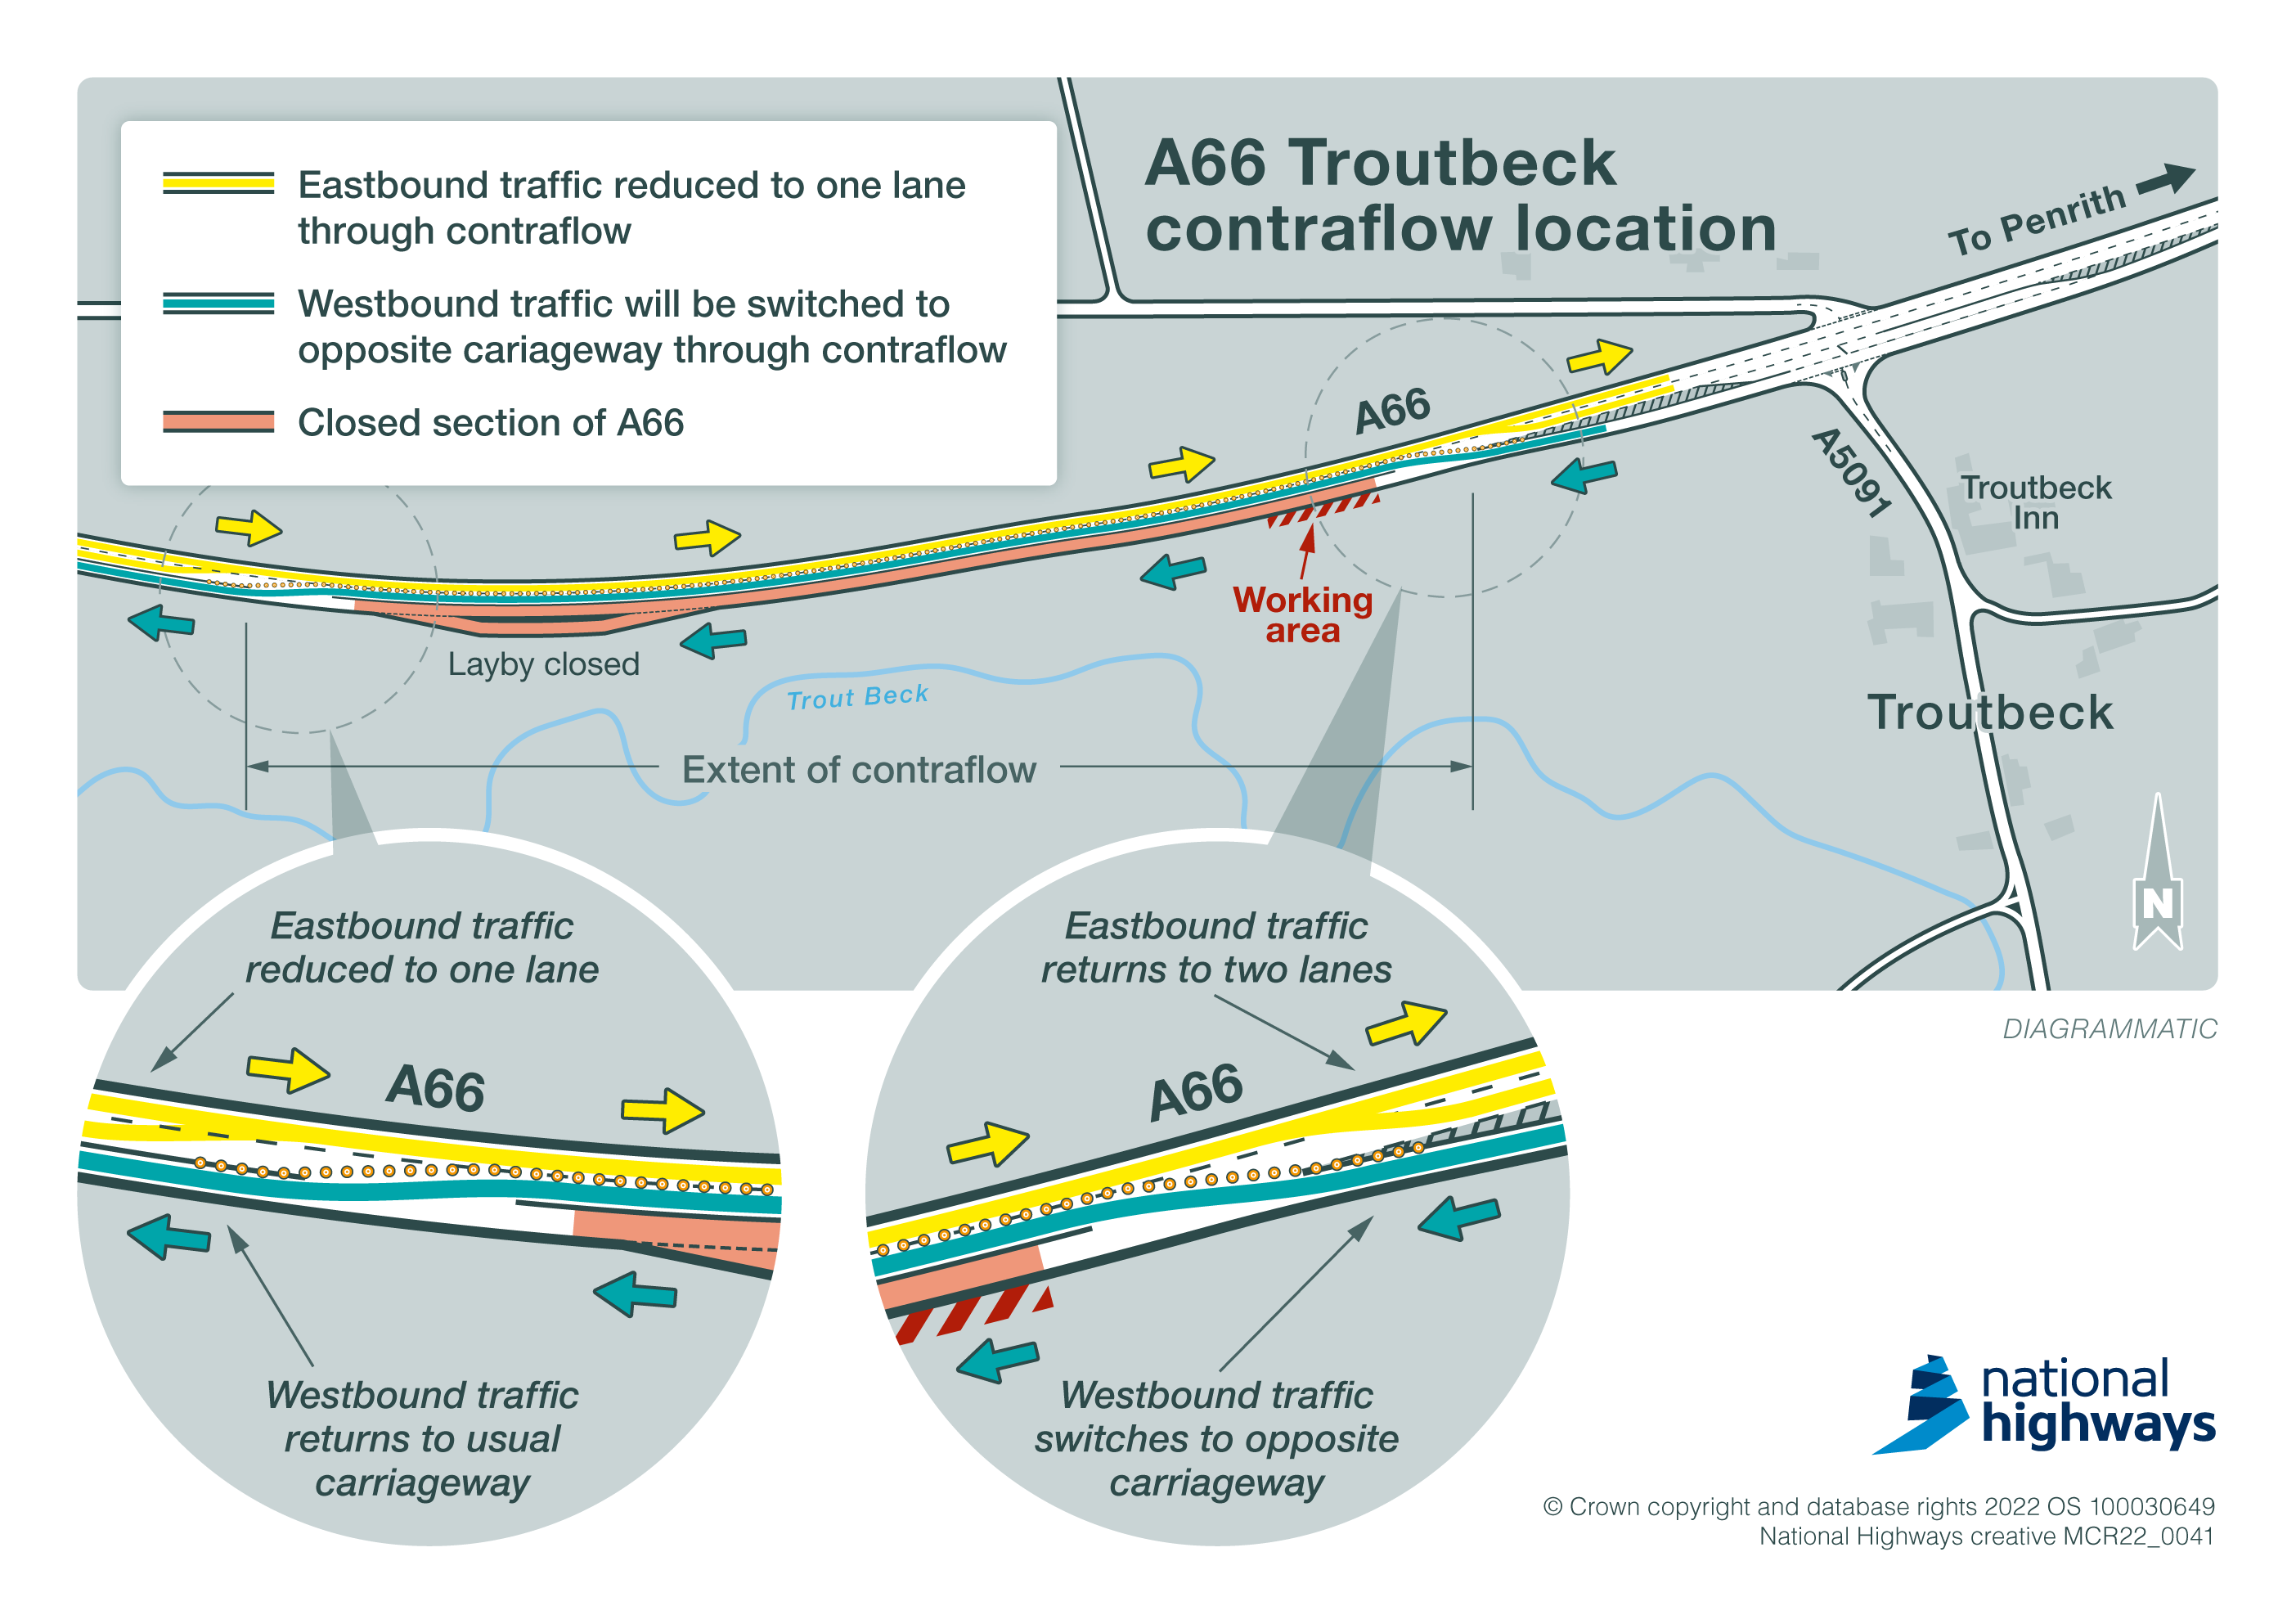 The A66 contraflow system